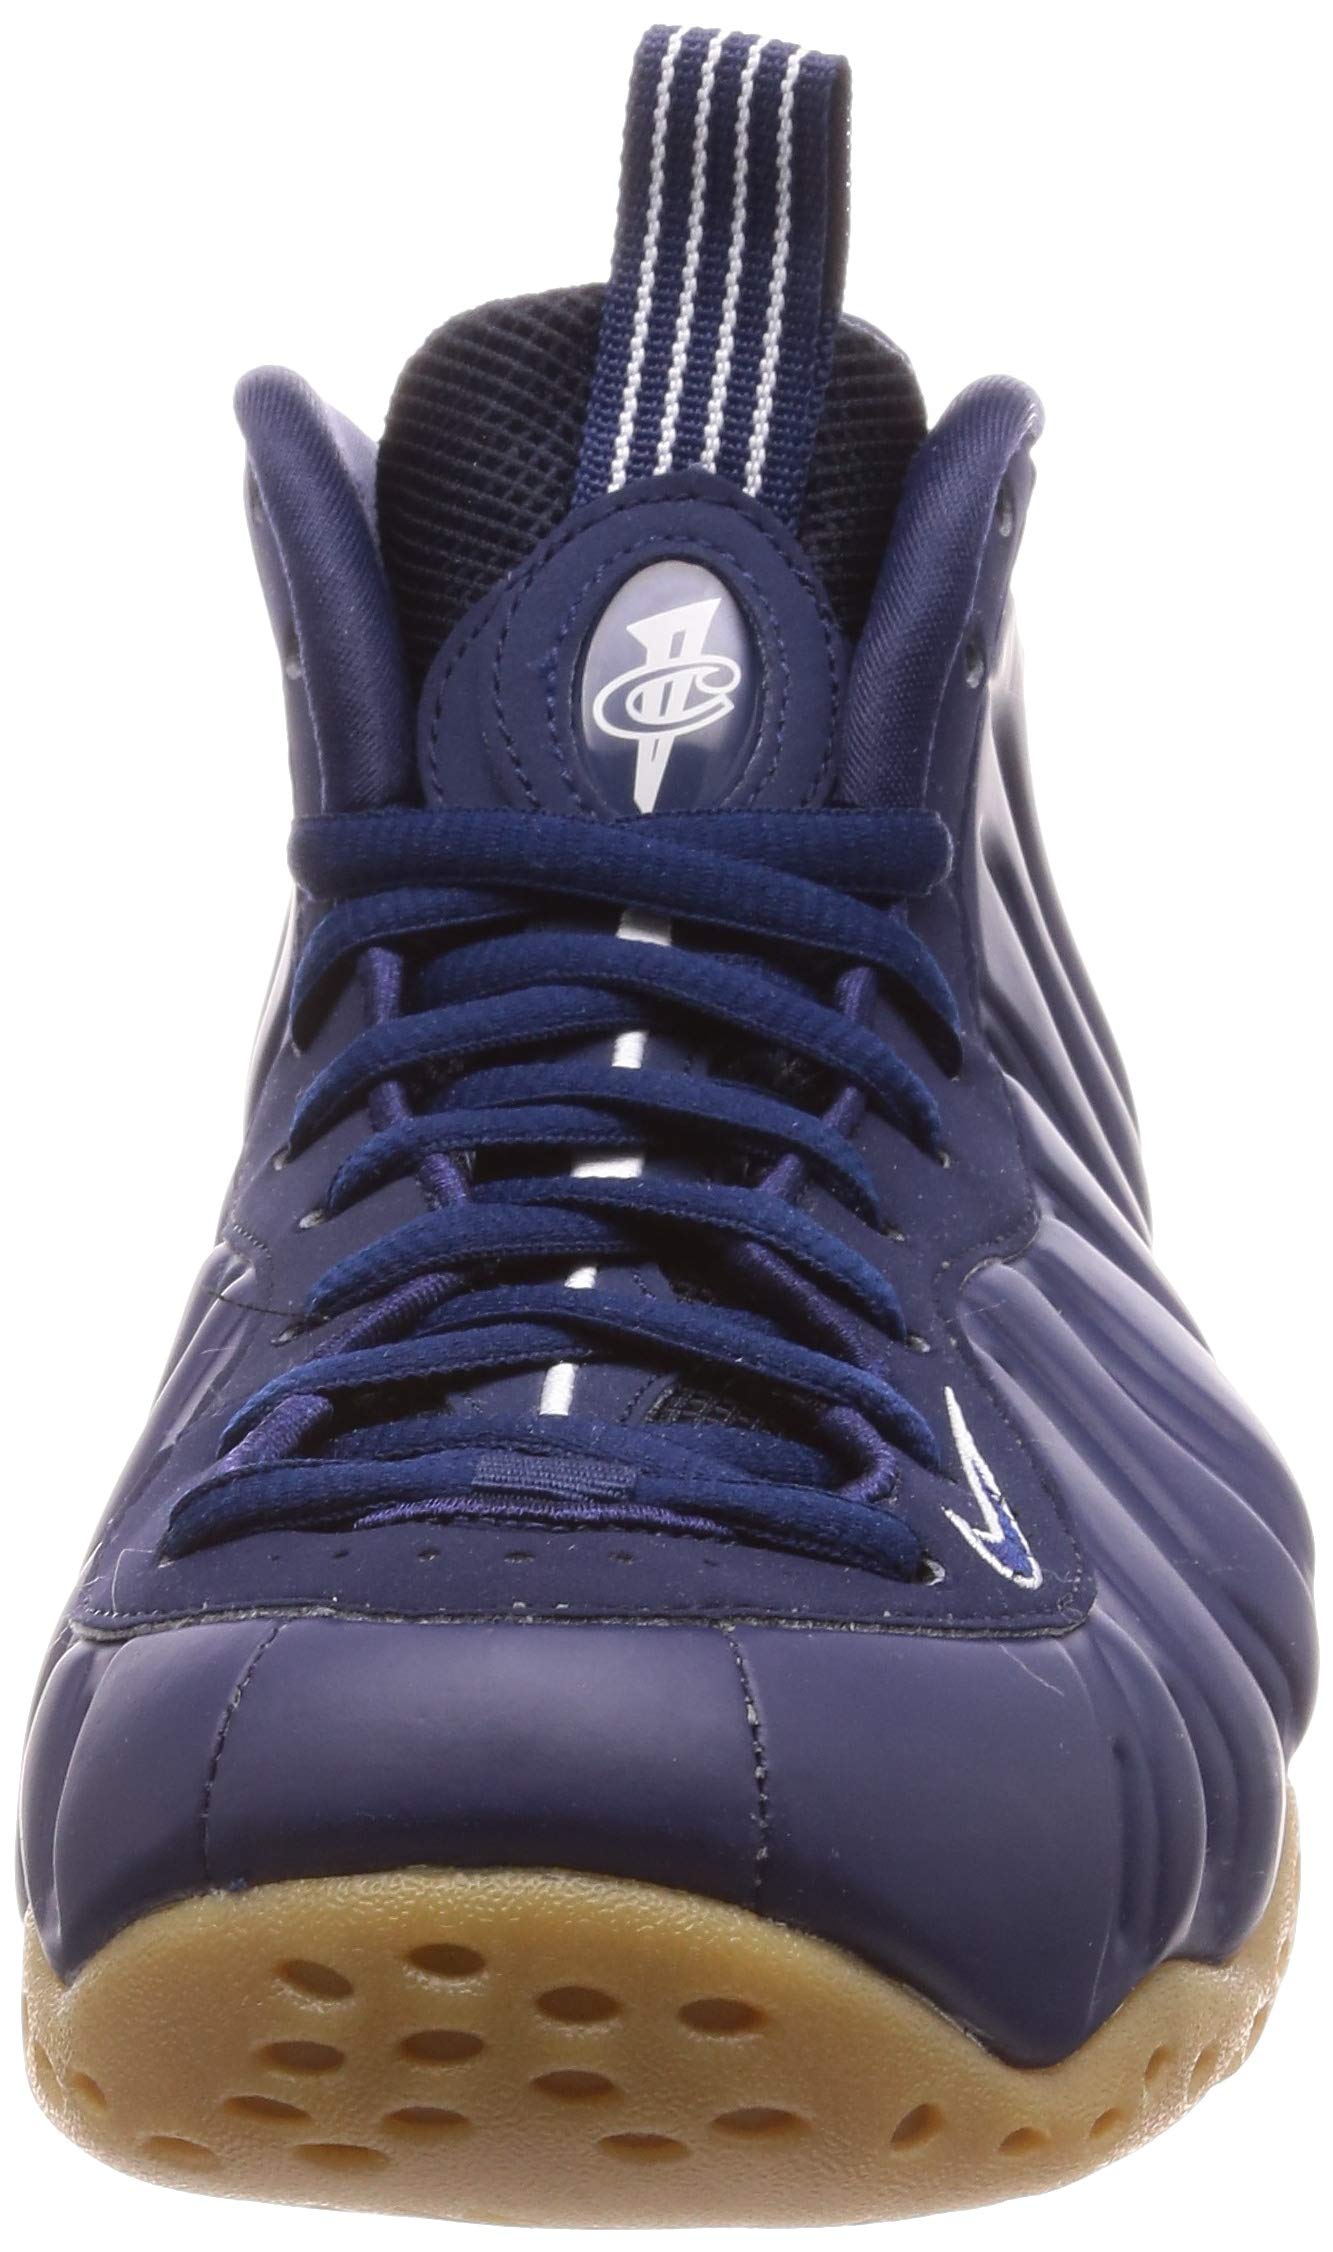 Nike Mens Air Foamposite One Basketball Shoe (9) - image 2 of 5